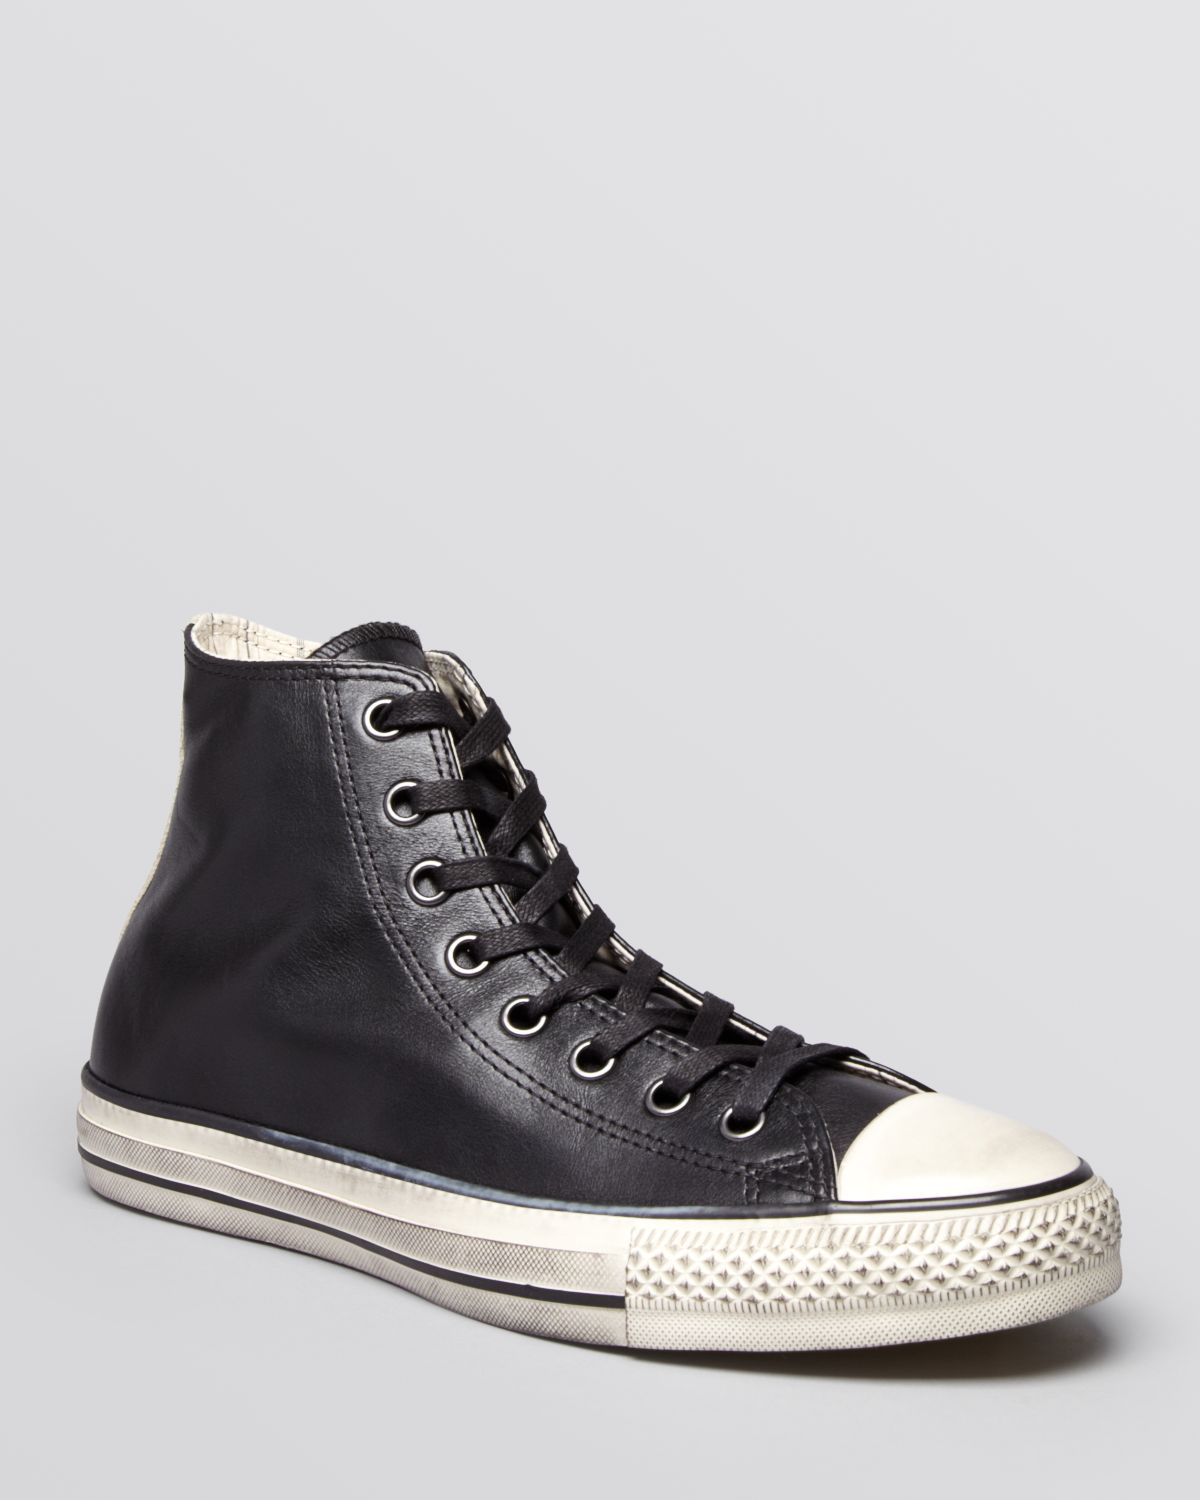 Converse By John Varvatos Chuck Taylor All Star Leather Sneakers in Black  for Men - Lyst